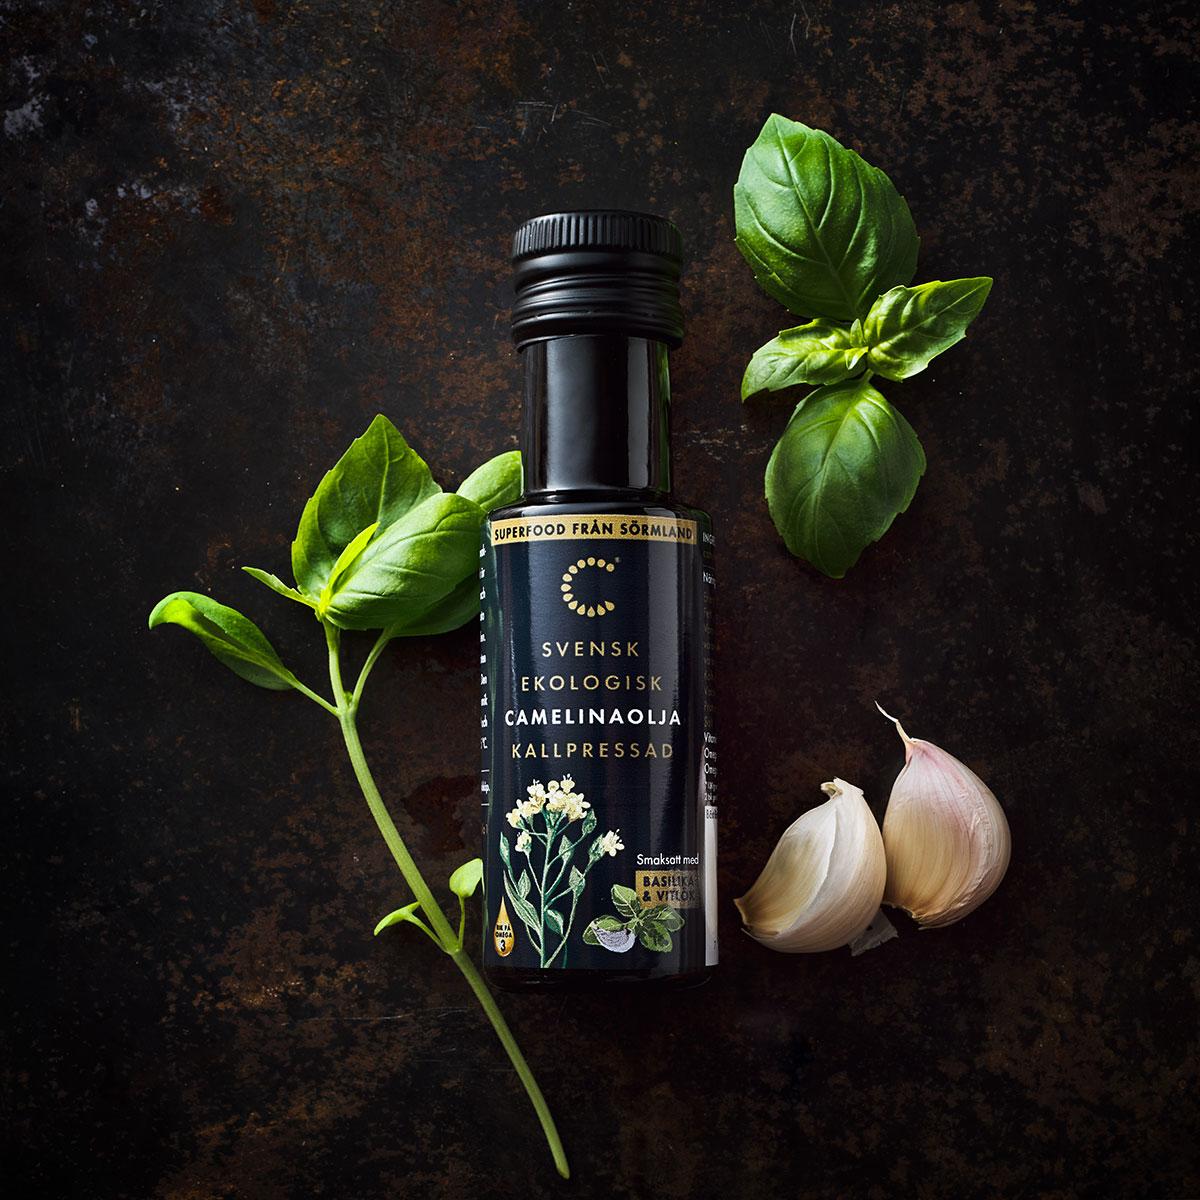 Camelina of Sweden's Camelina oil flavored with basil and garlic'